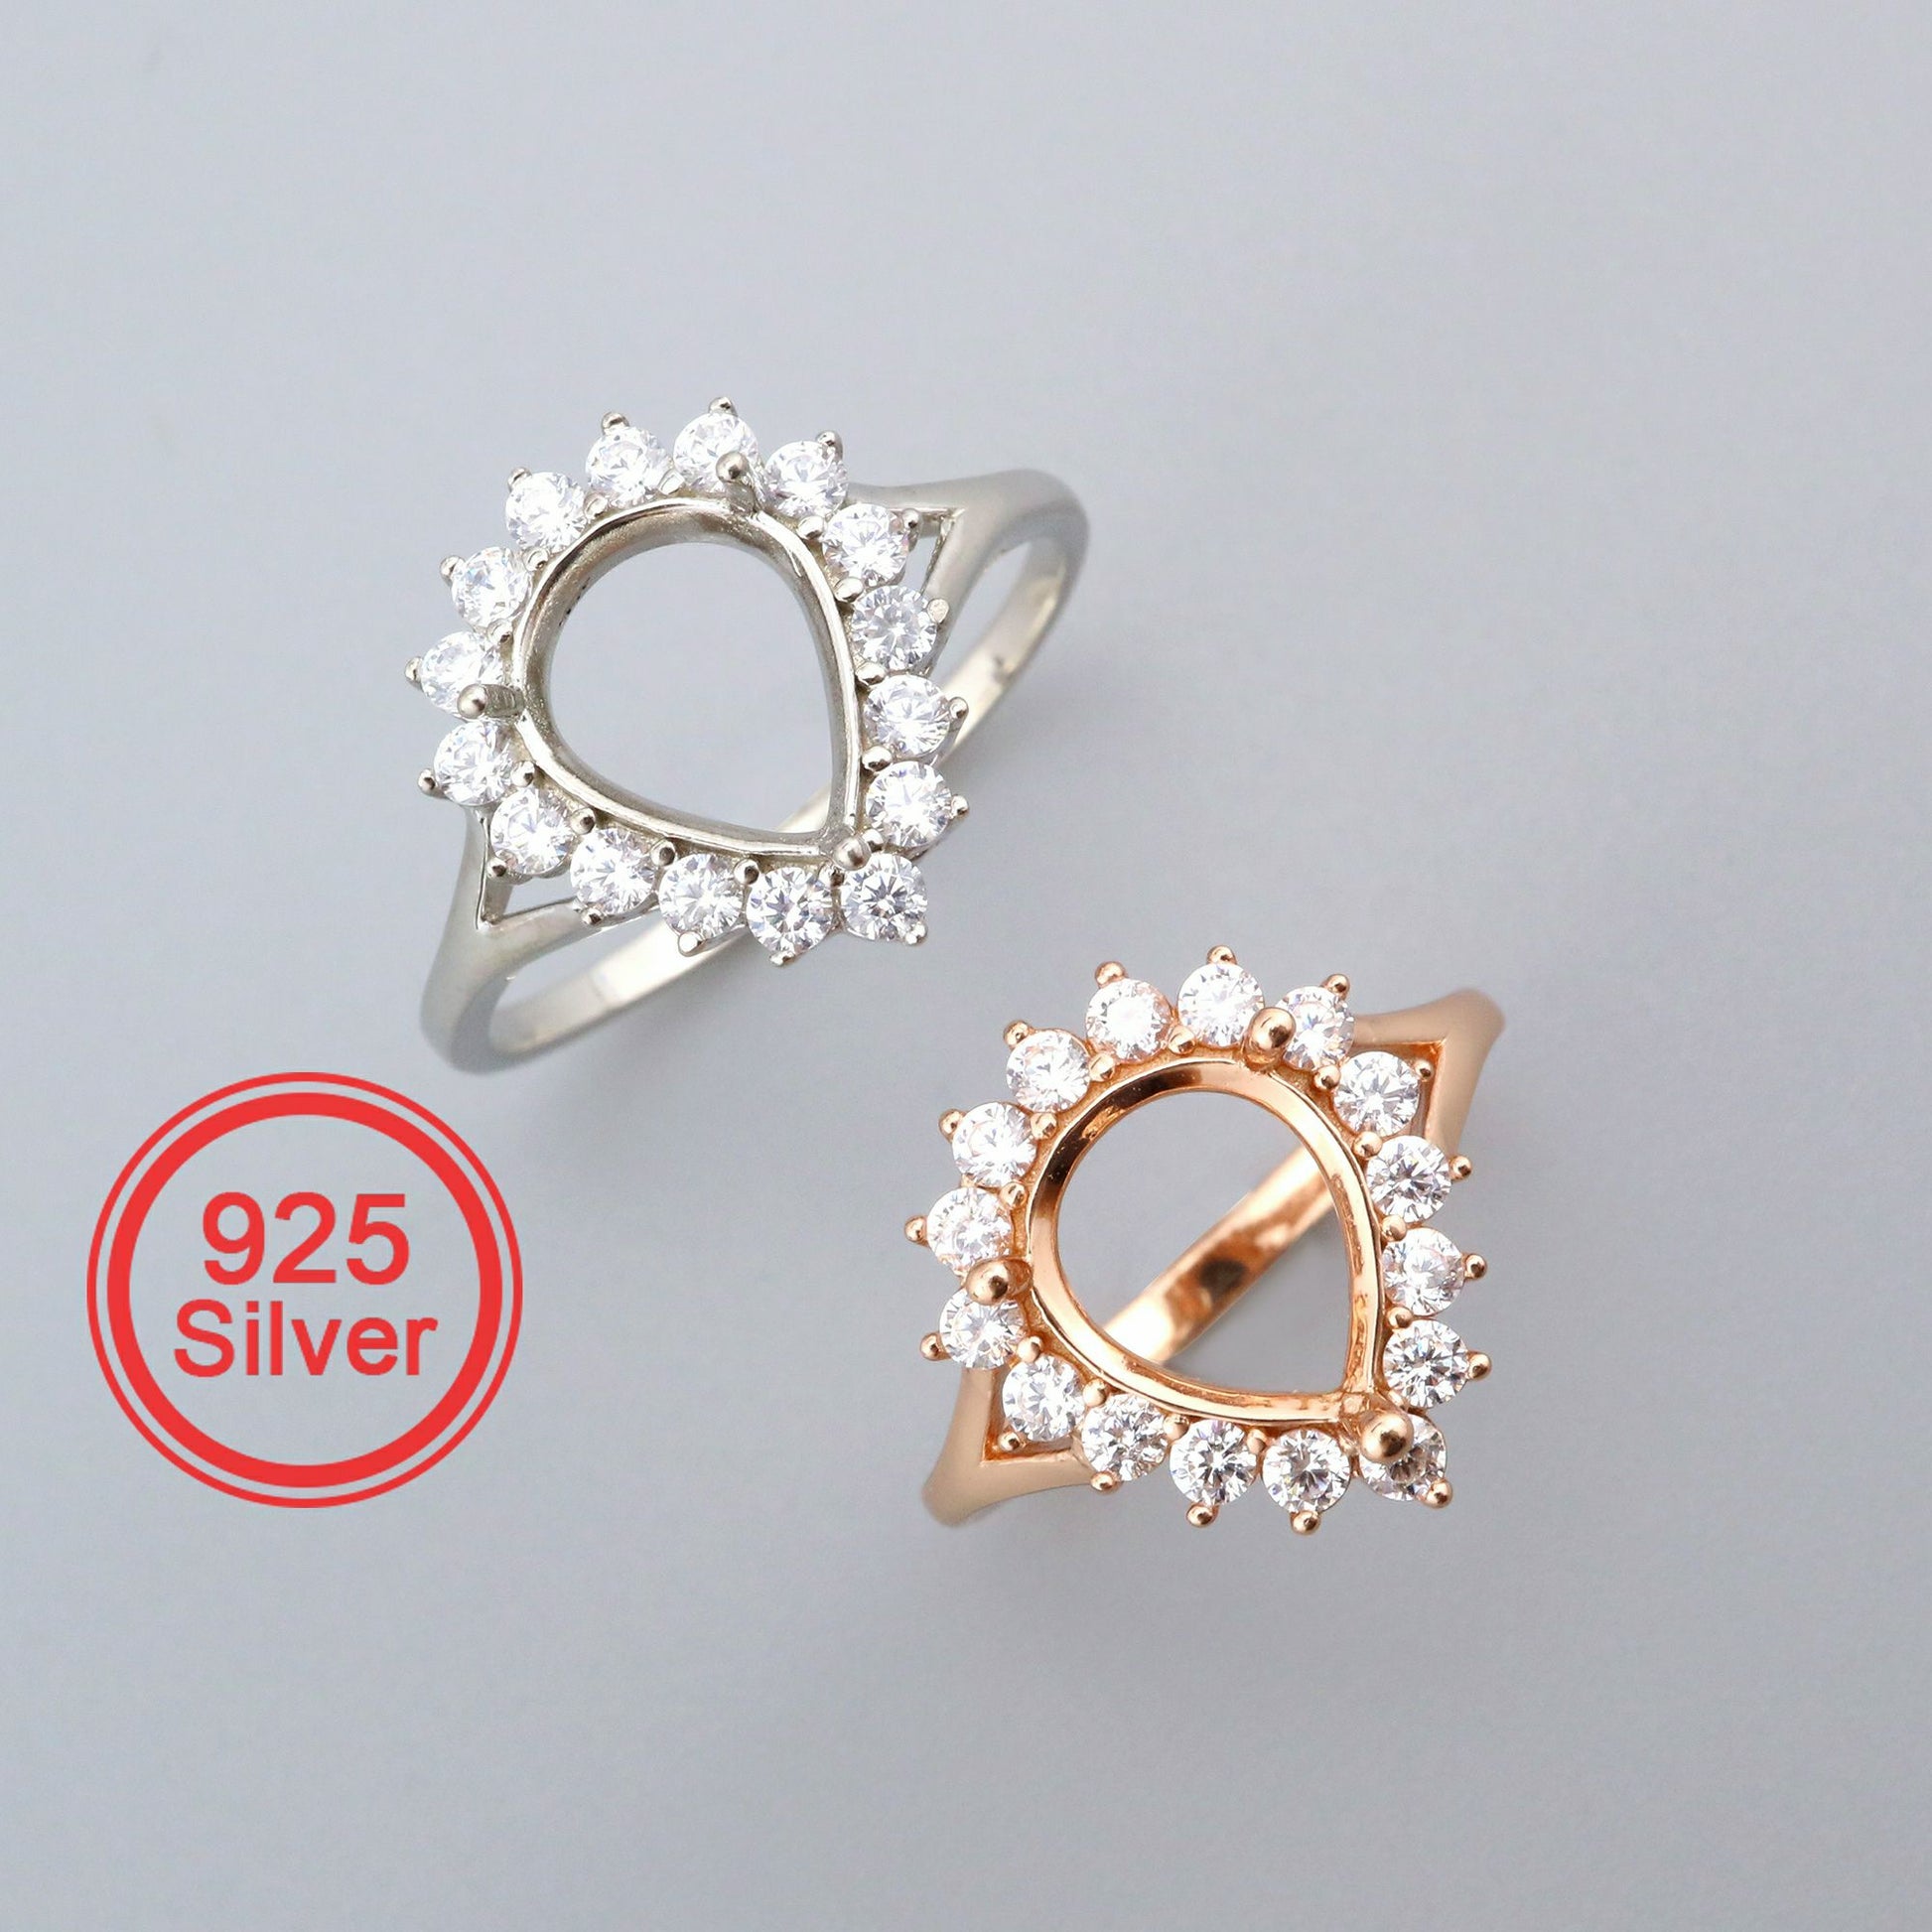 One silver and one rose gold pear halo semi mount setting.